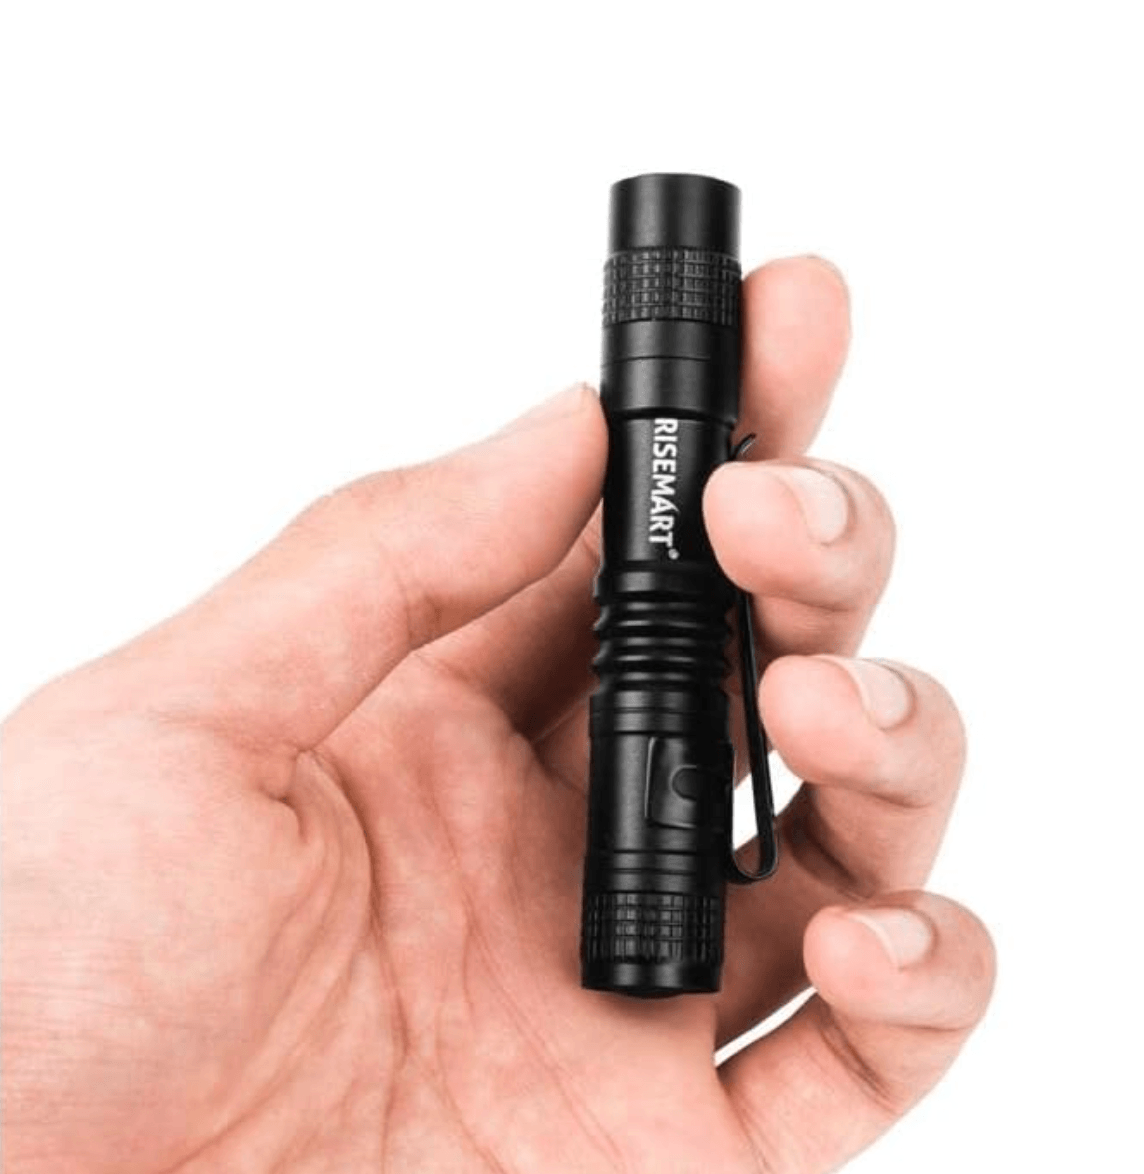 Mini torch for working with chakras